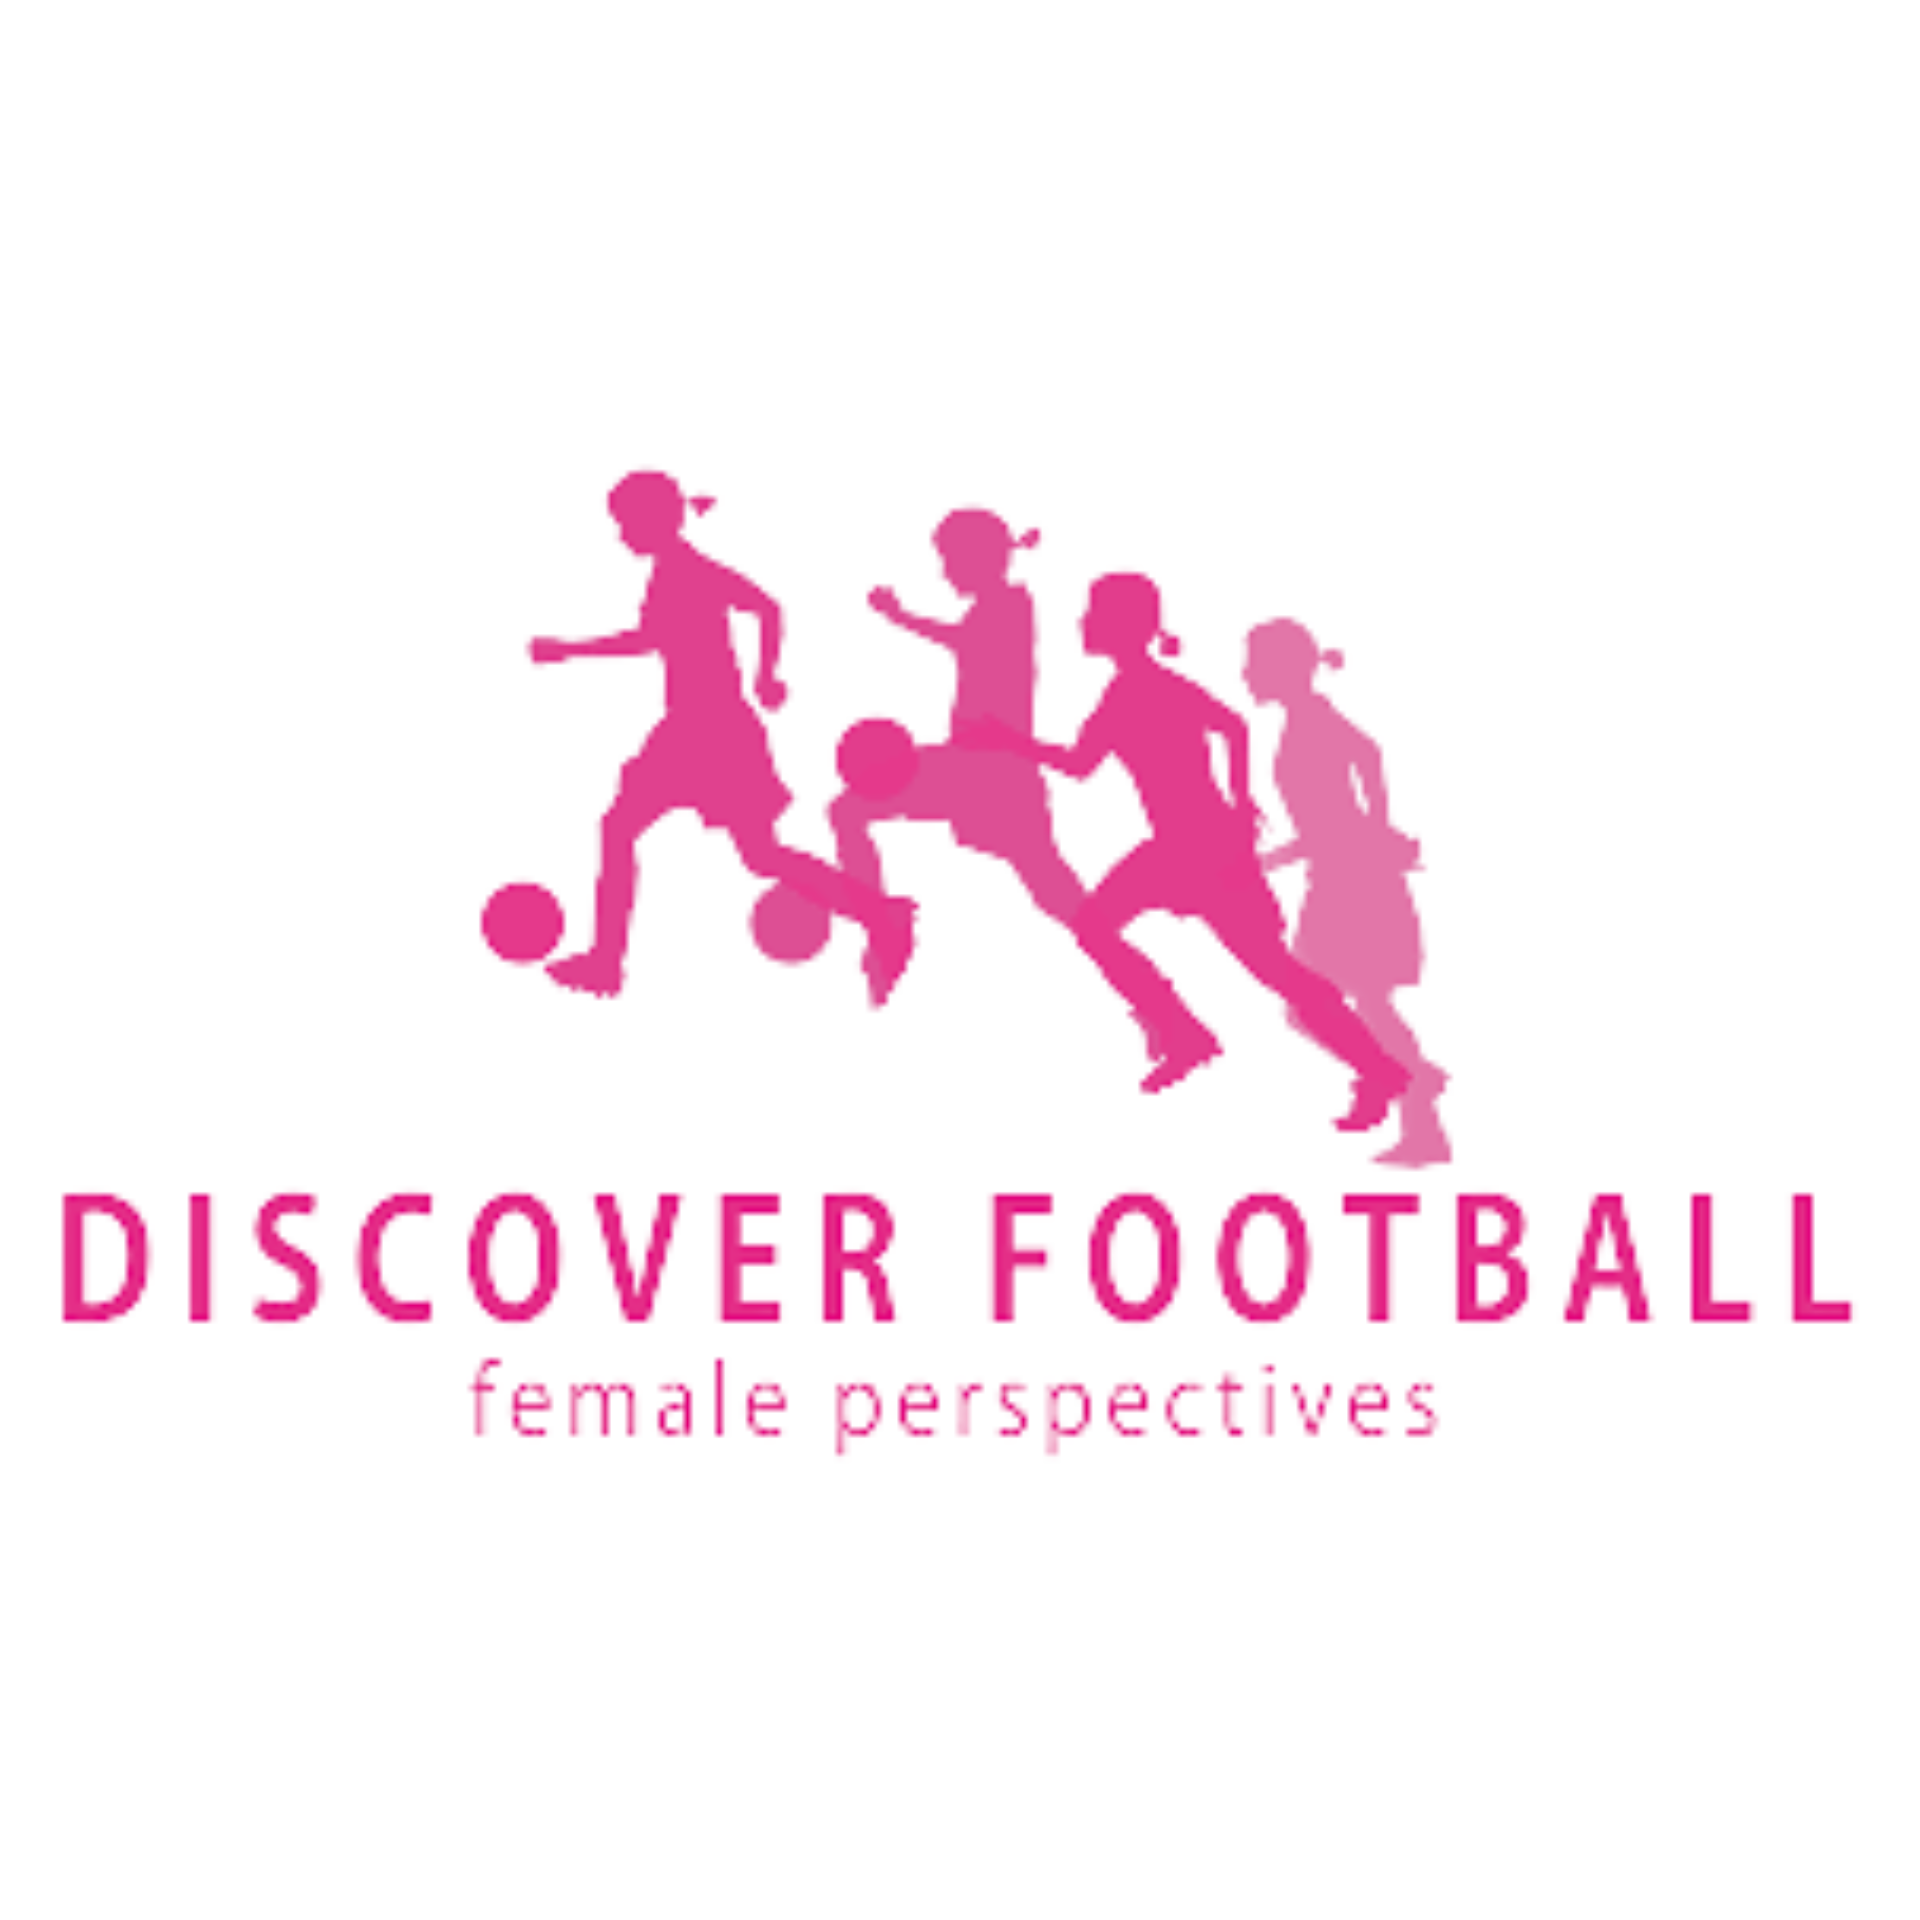 Discover Football logo.png